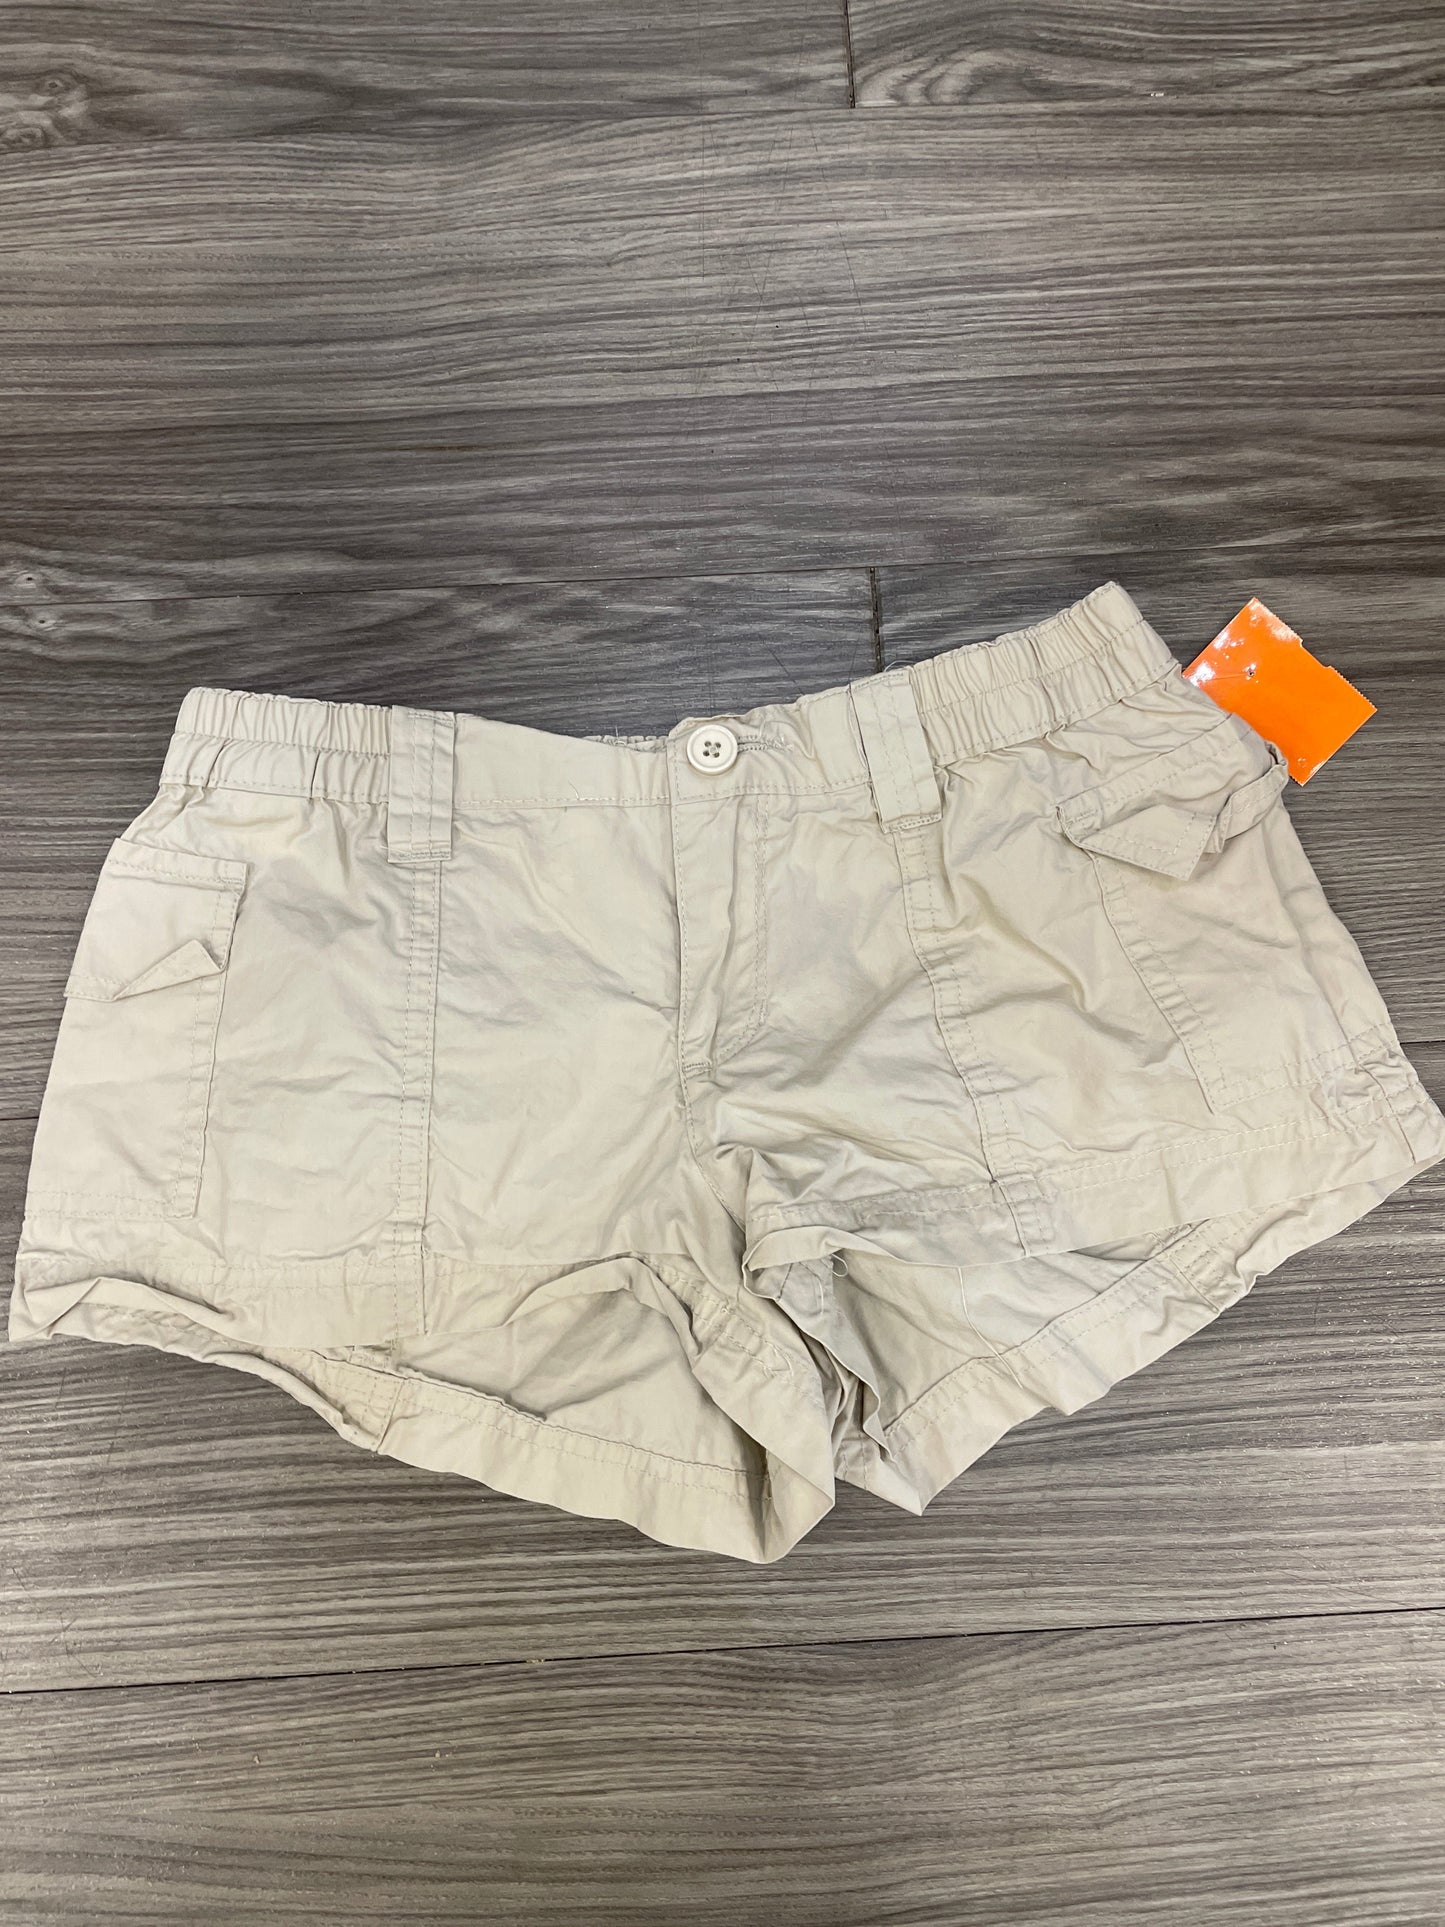 Shorts By Pacsun  Size: Xs